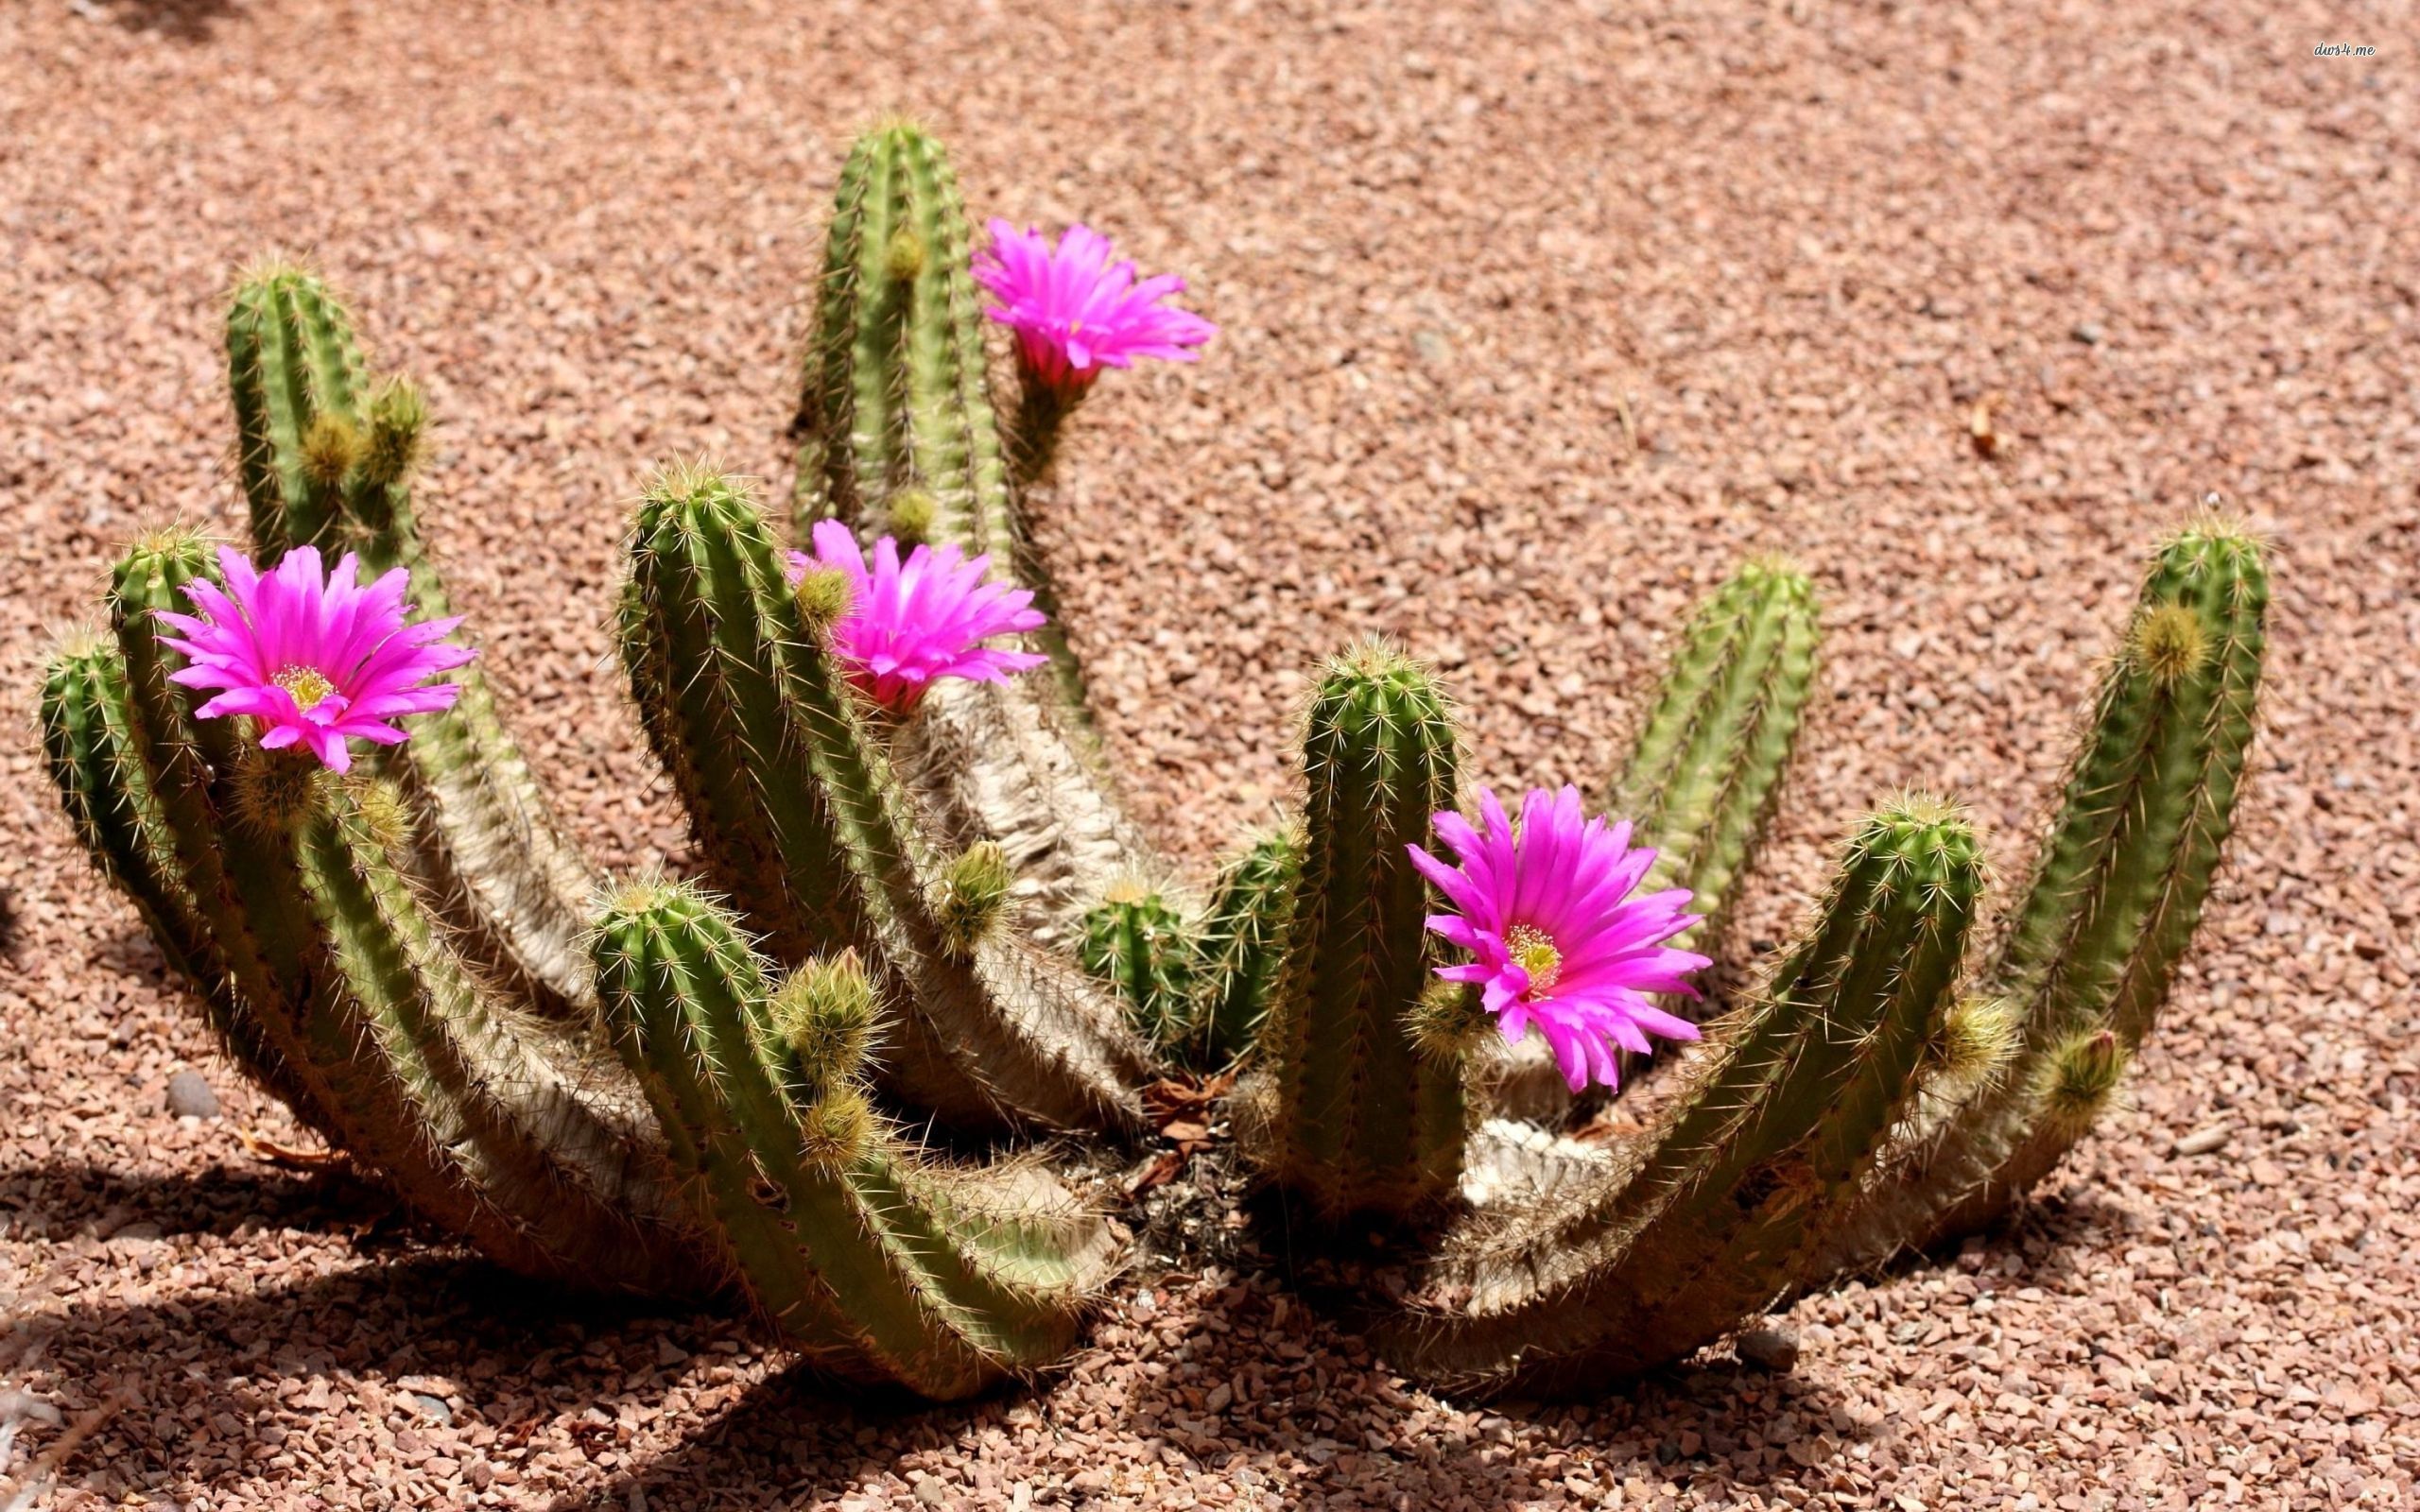 Cactus Flowers Wallpaper Background 47 2560x1600 px Picky